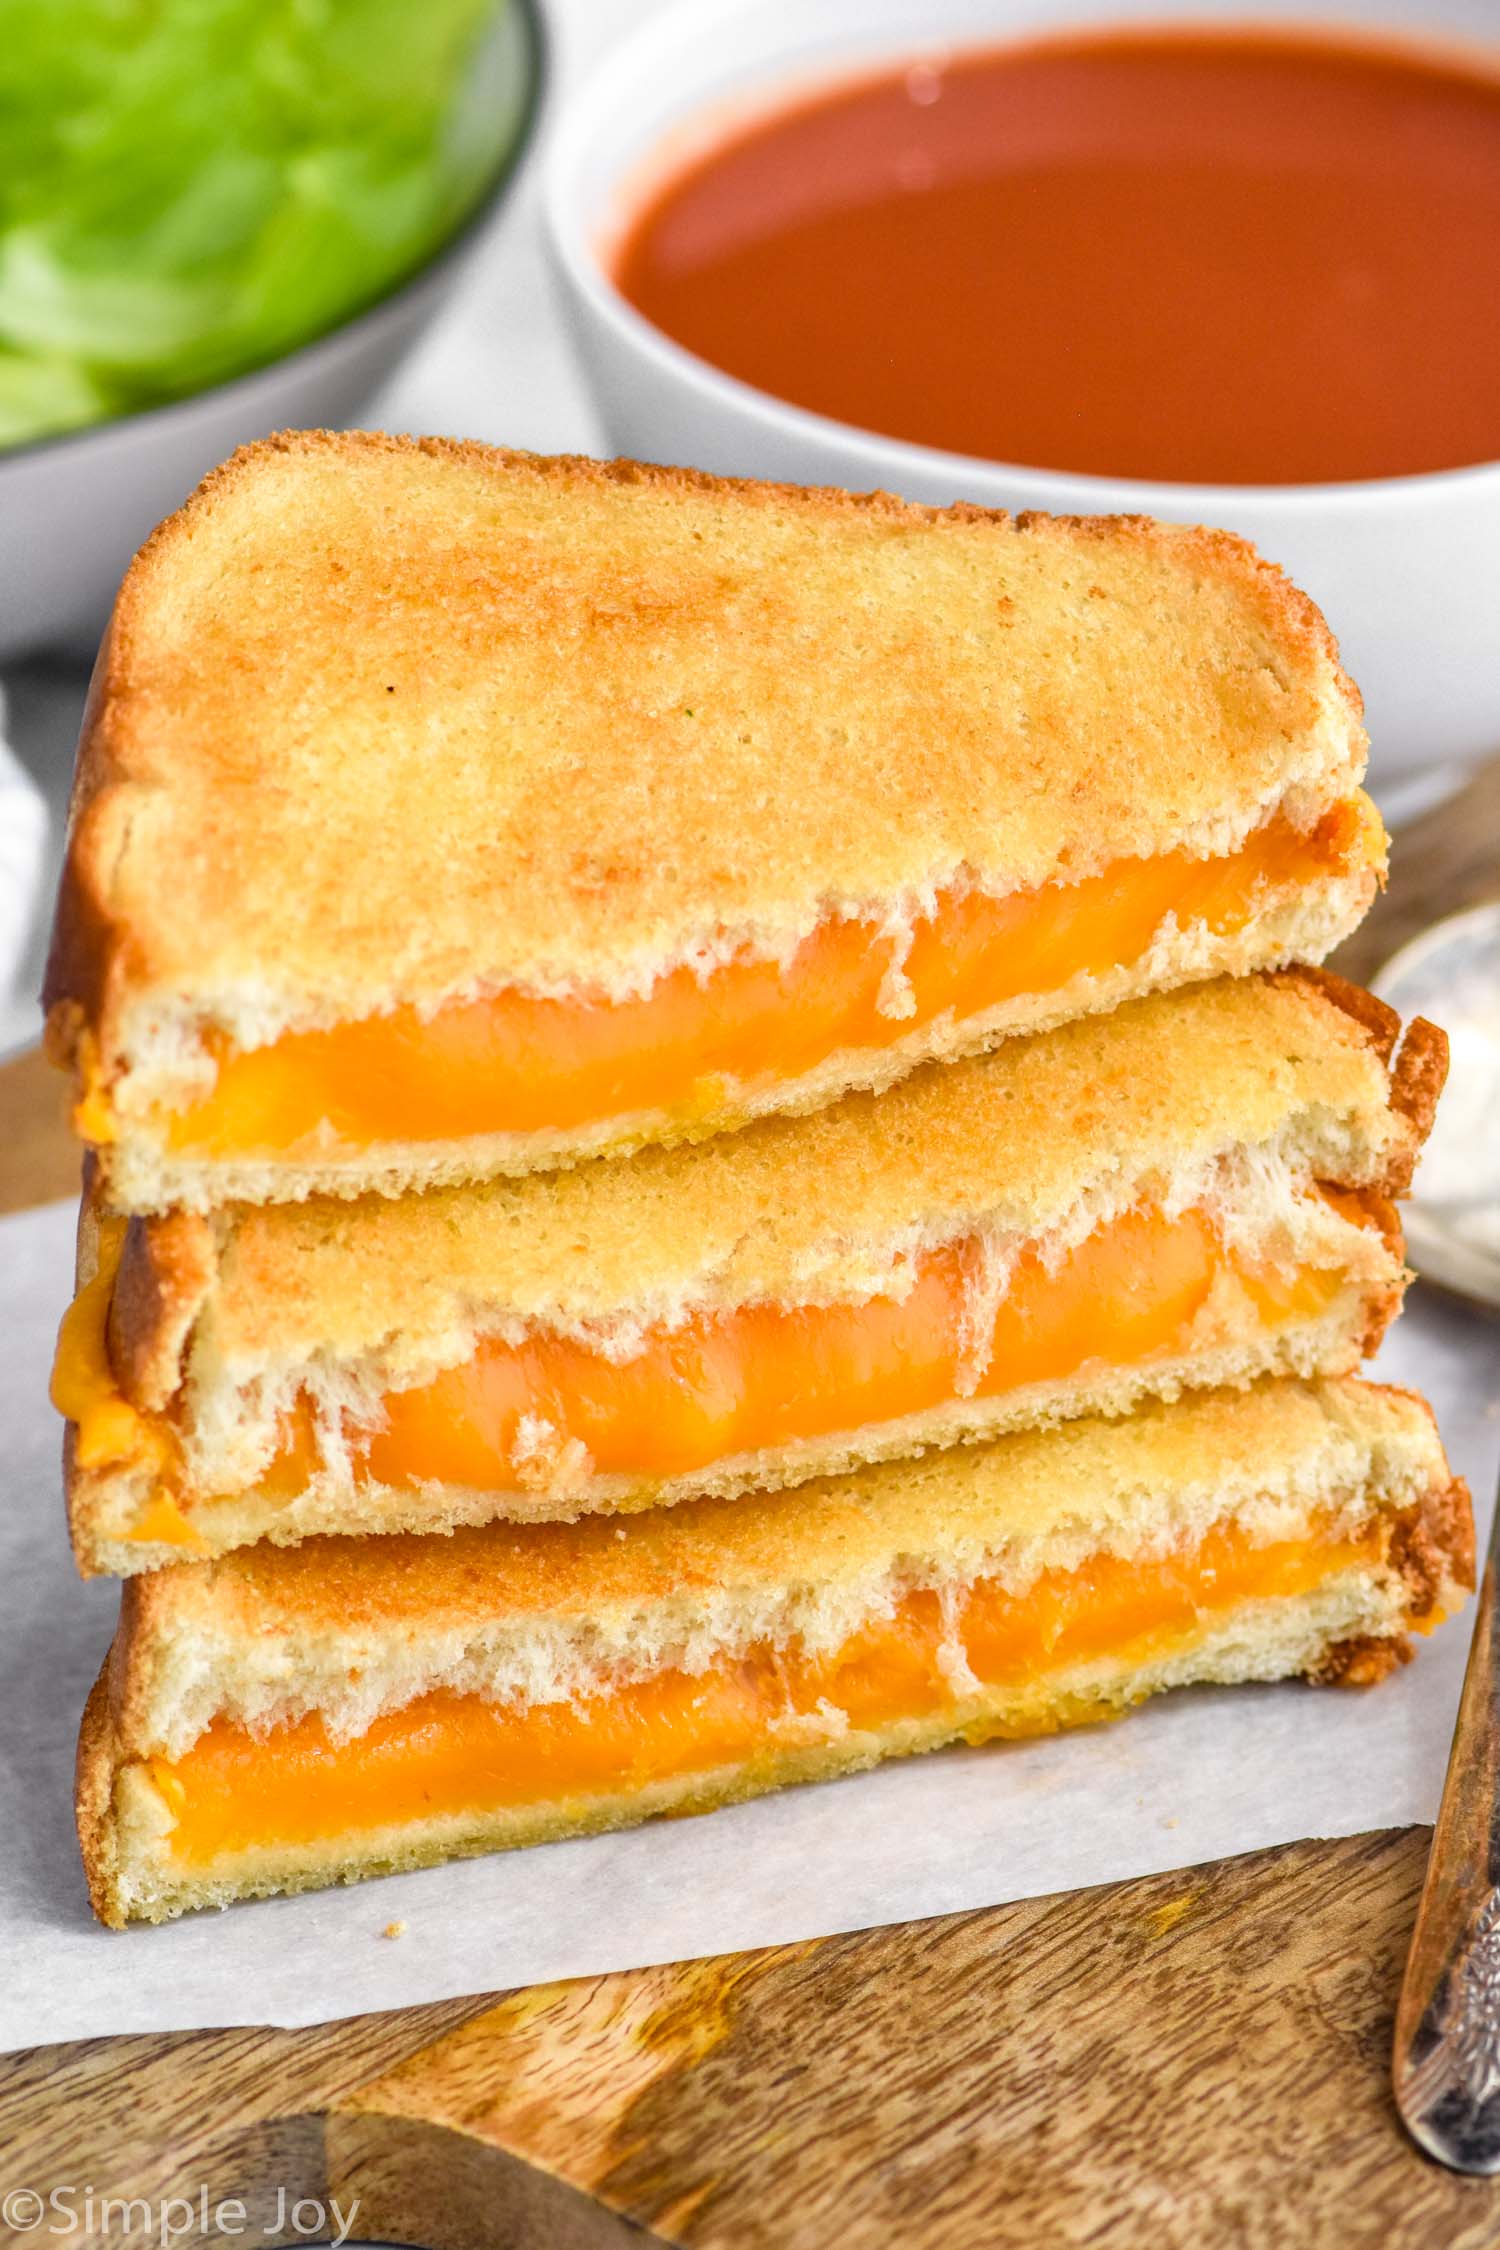 https://www.simplejoy.com/wp-content/uploads/2022/07/grilled-cheese-inair-fryer.jpg